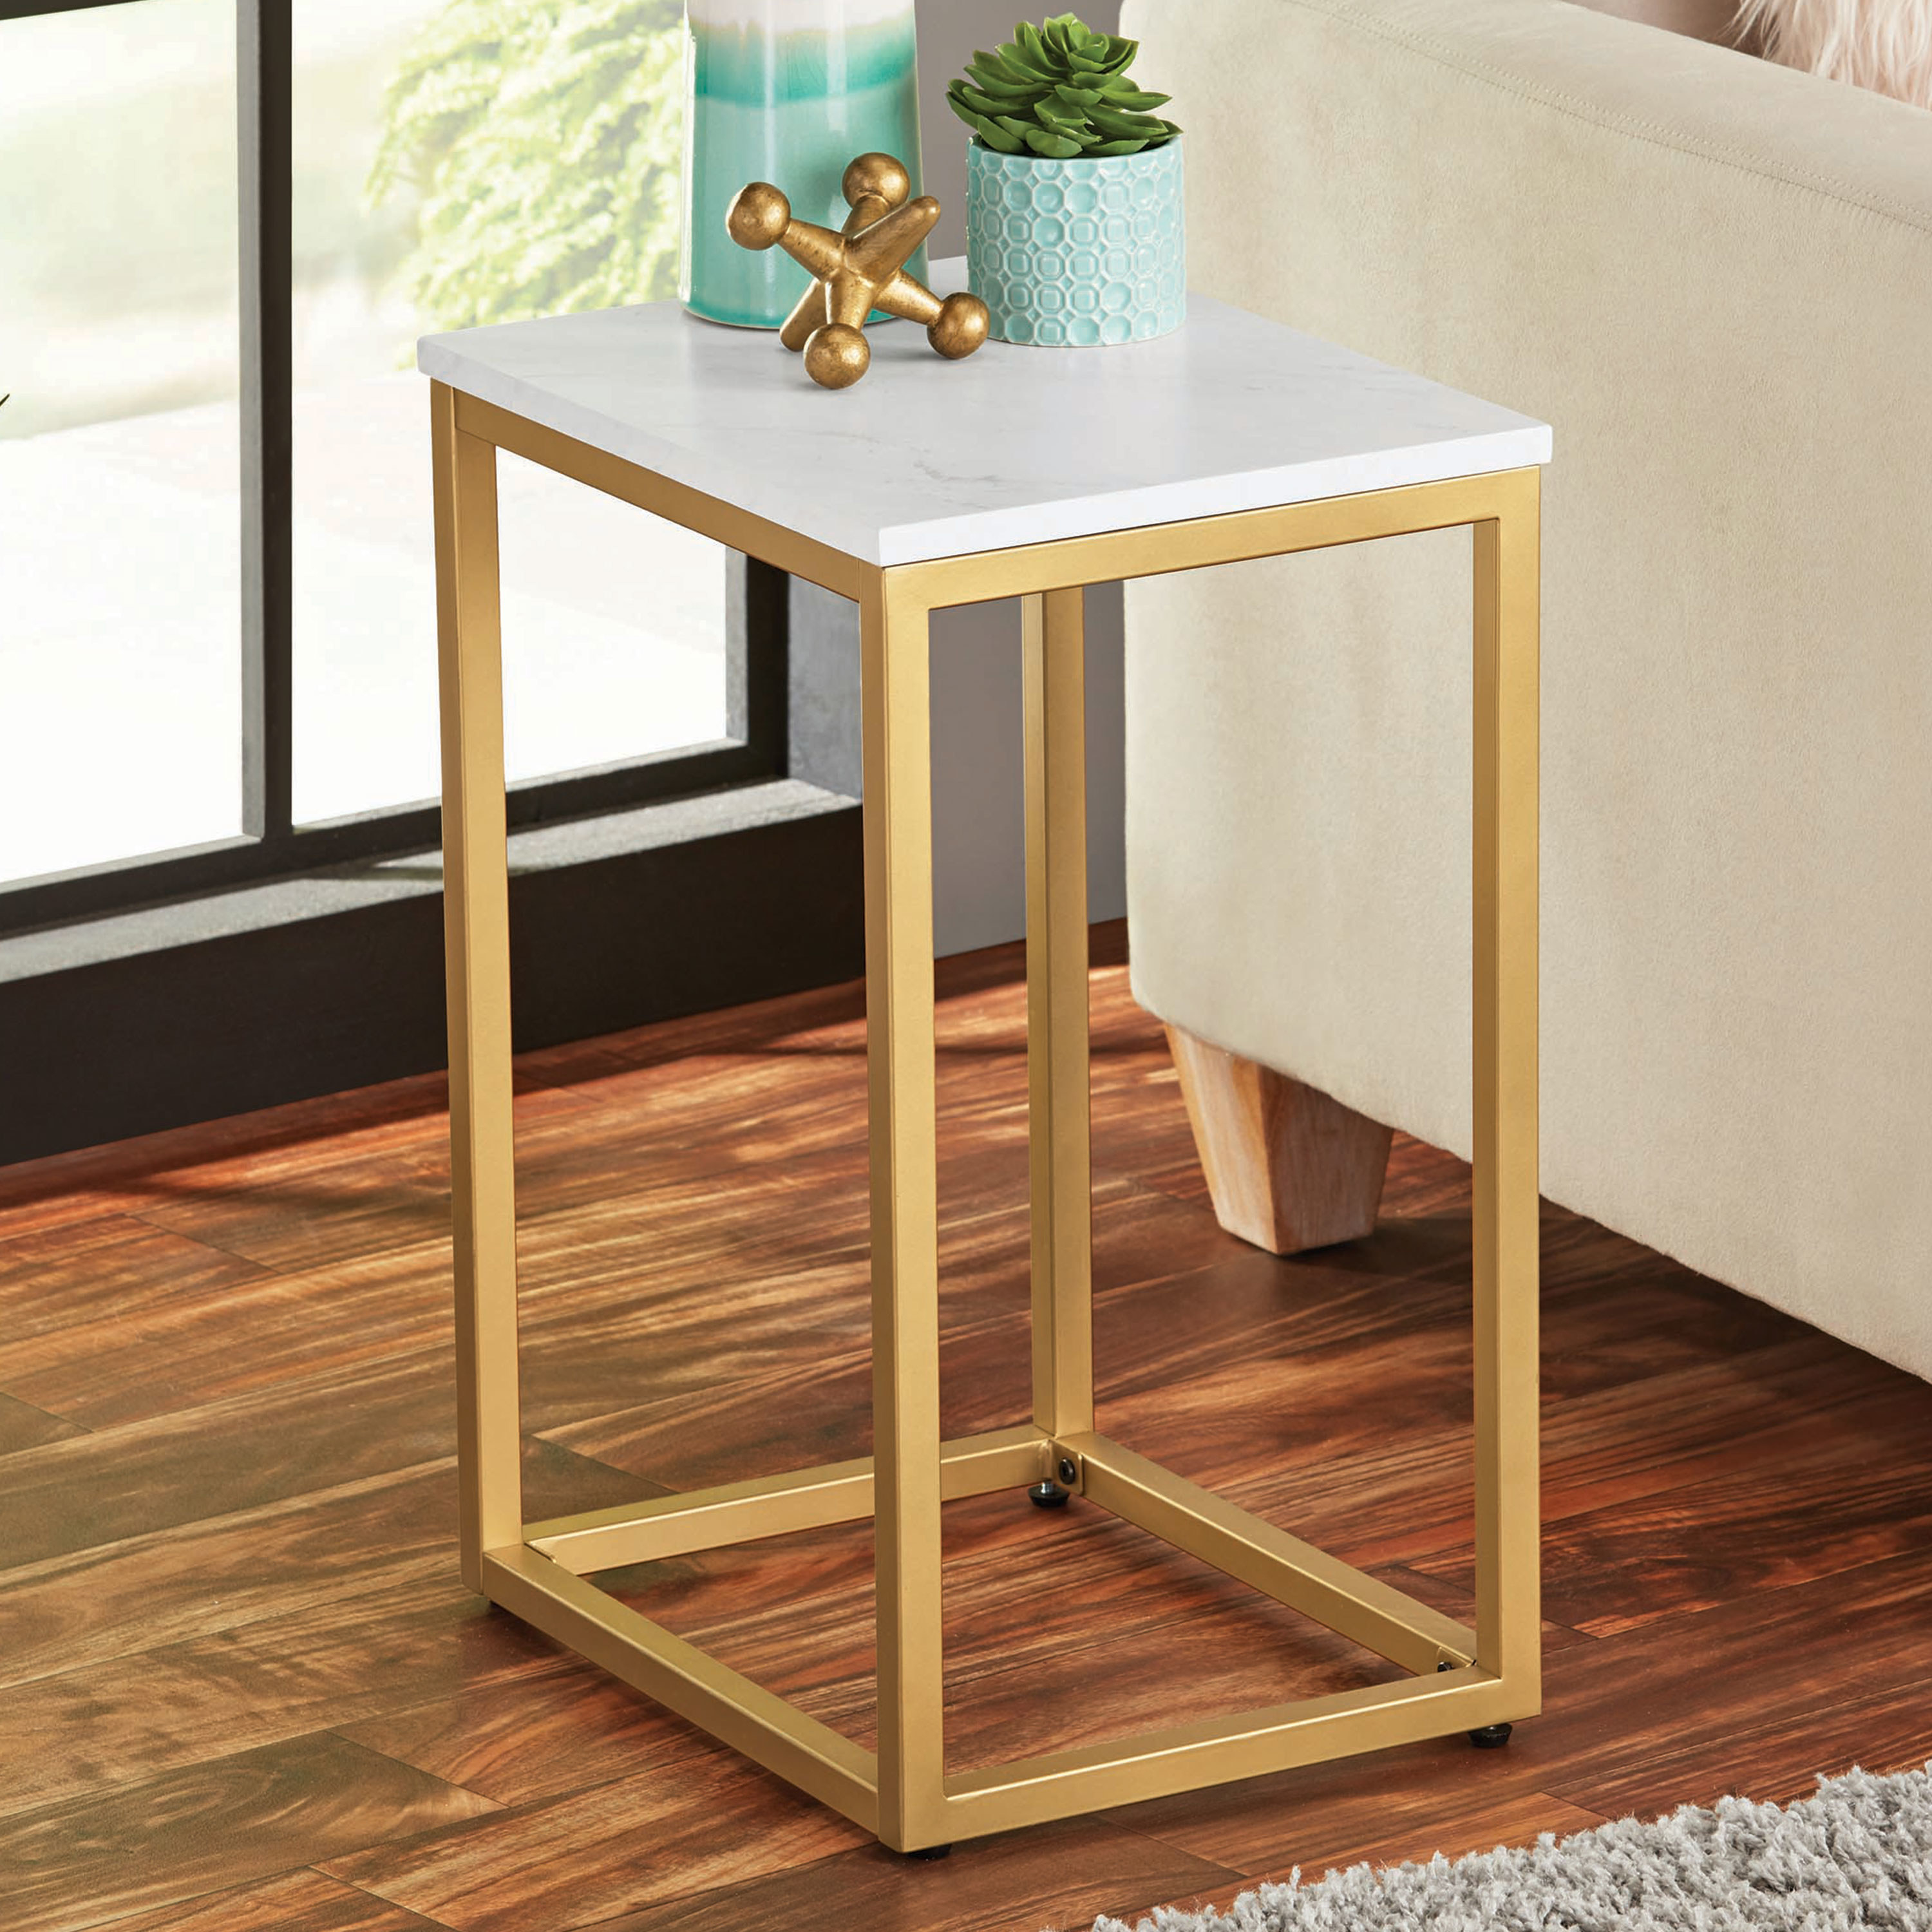 the gold table with a white marble top